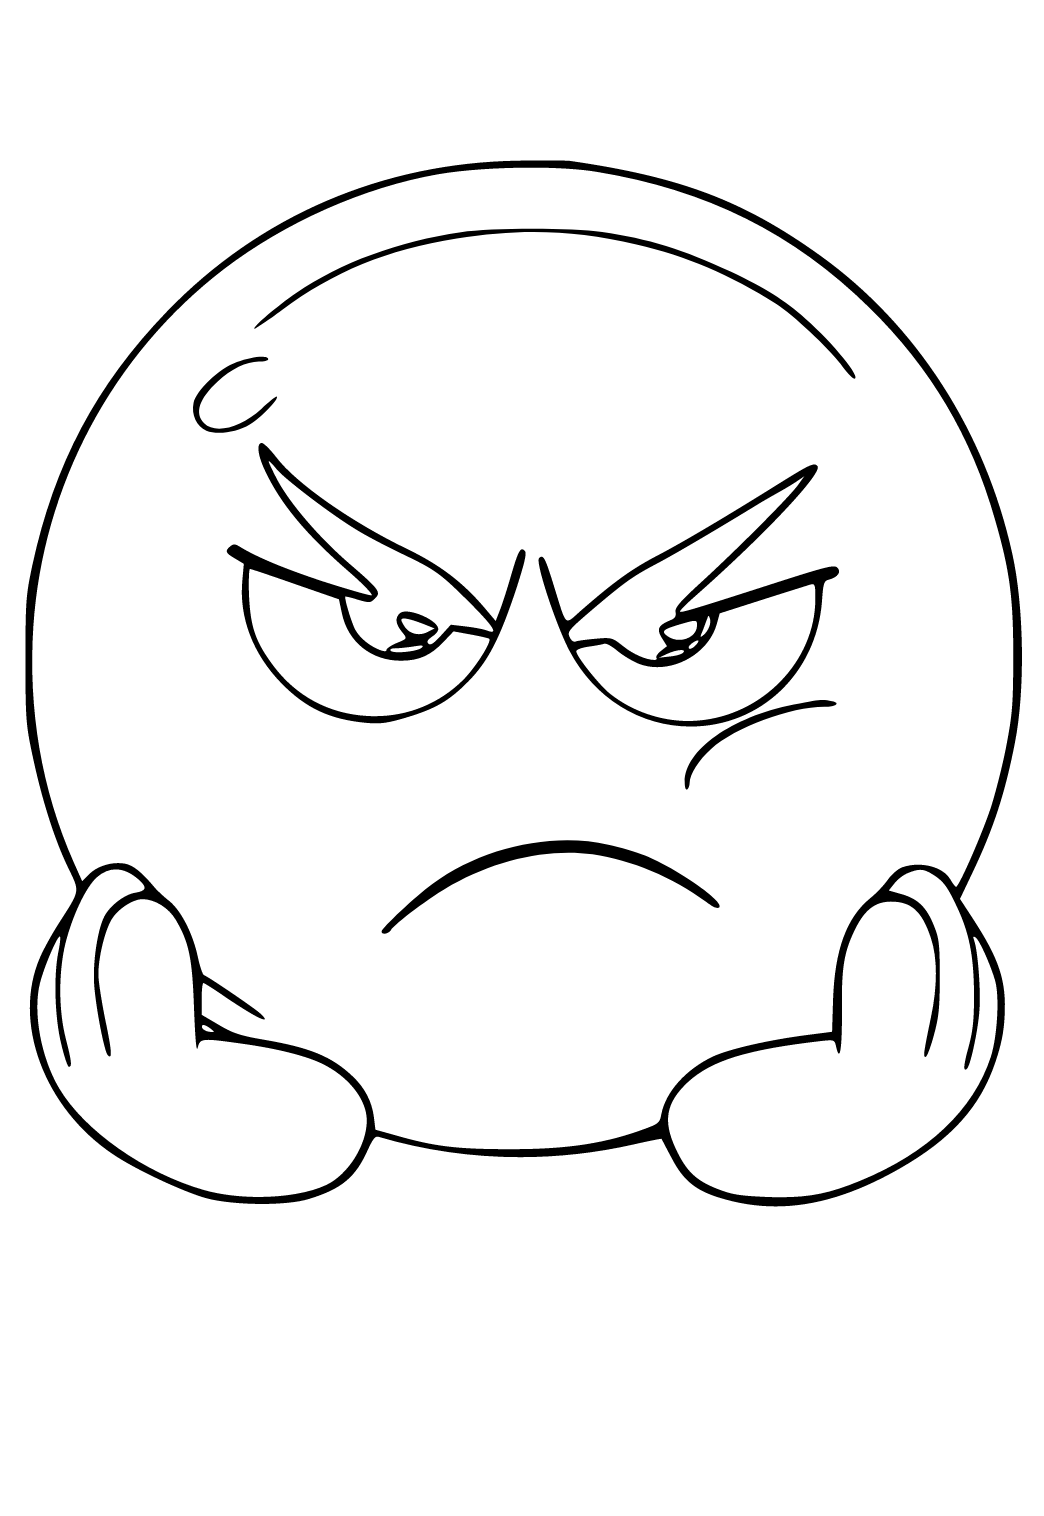 Free printable emoji resentment coloring page for adults and kids